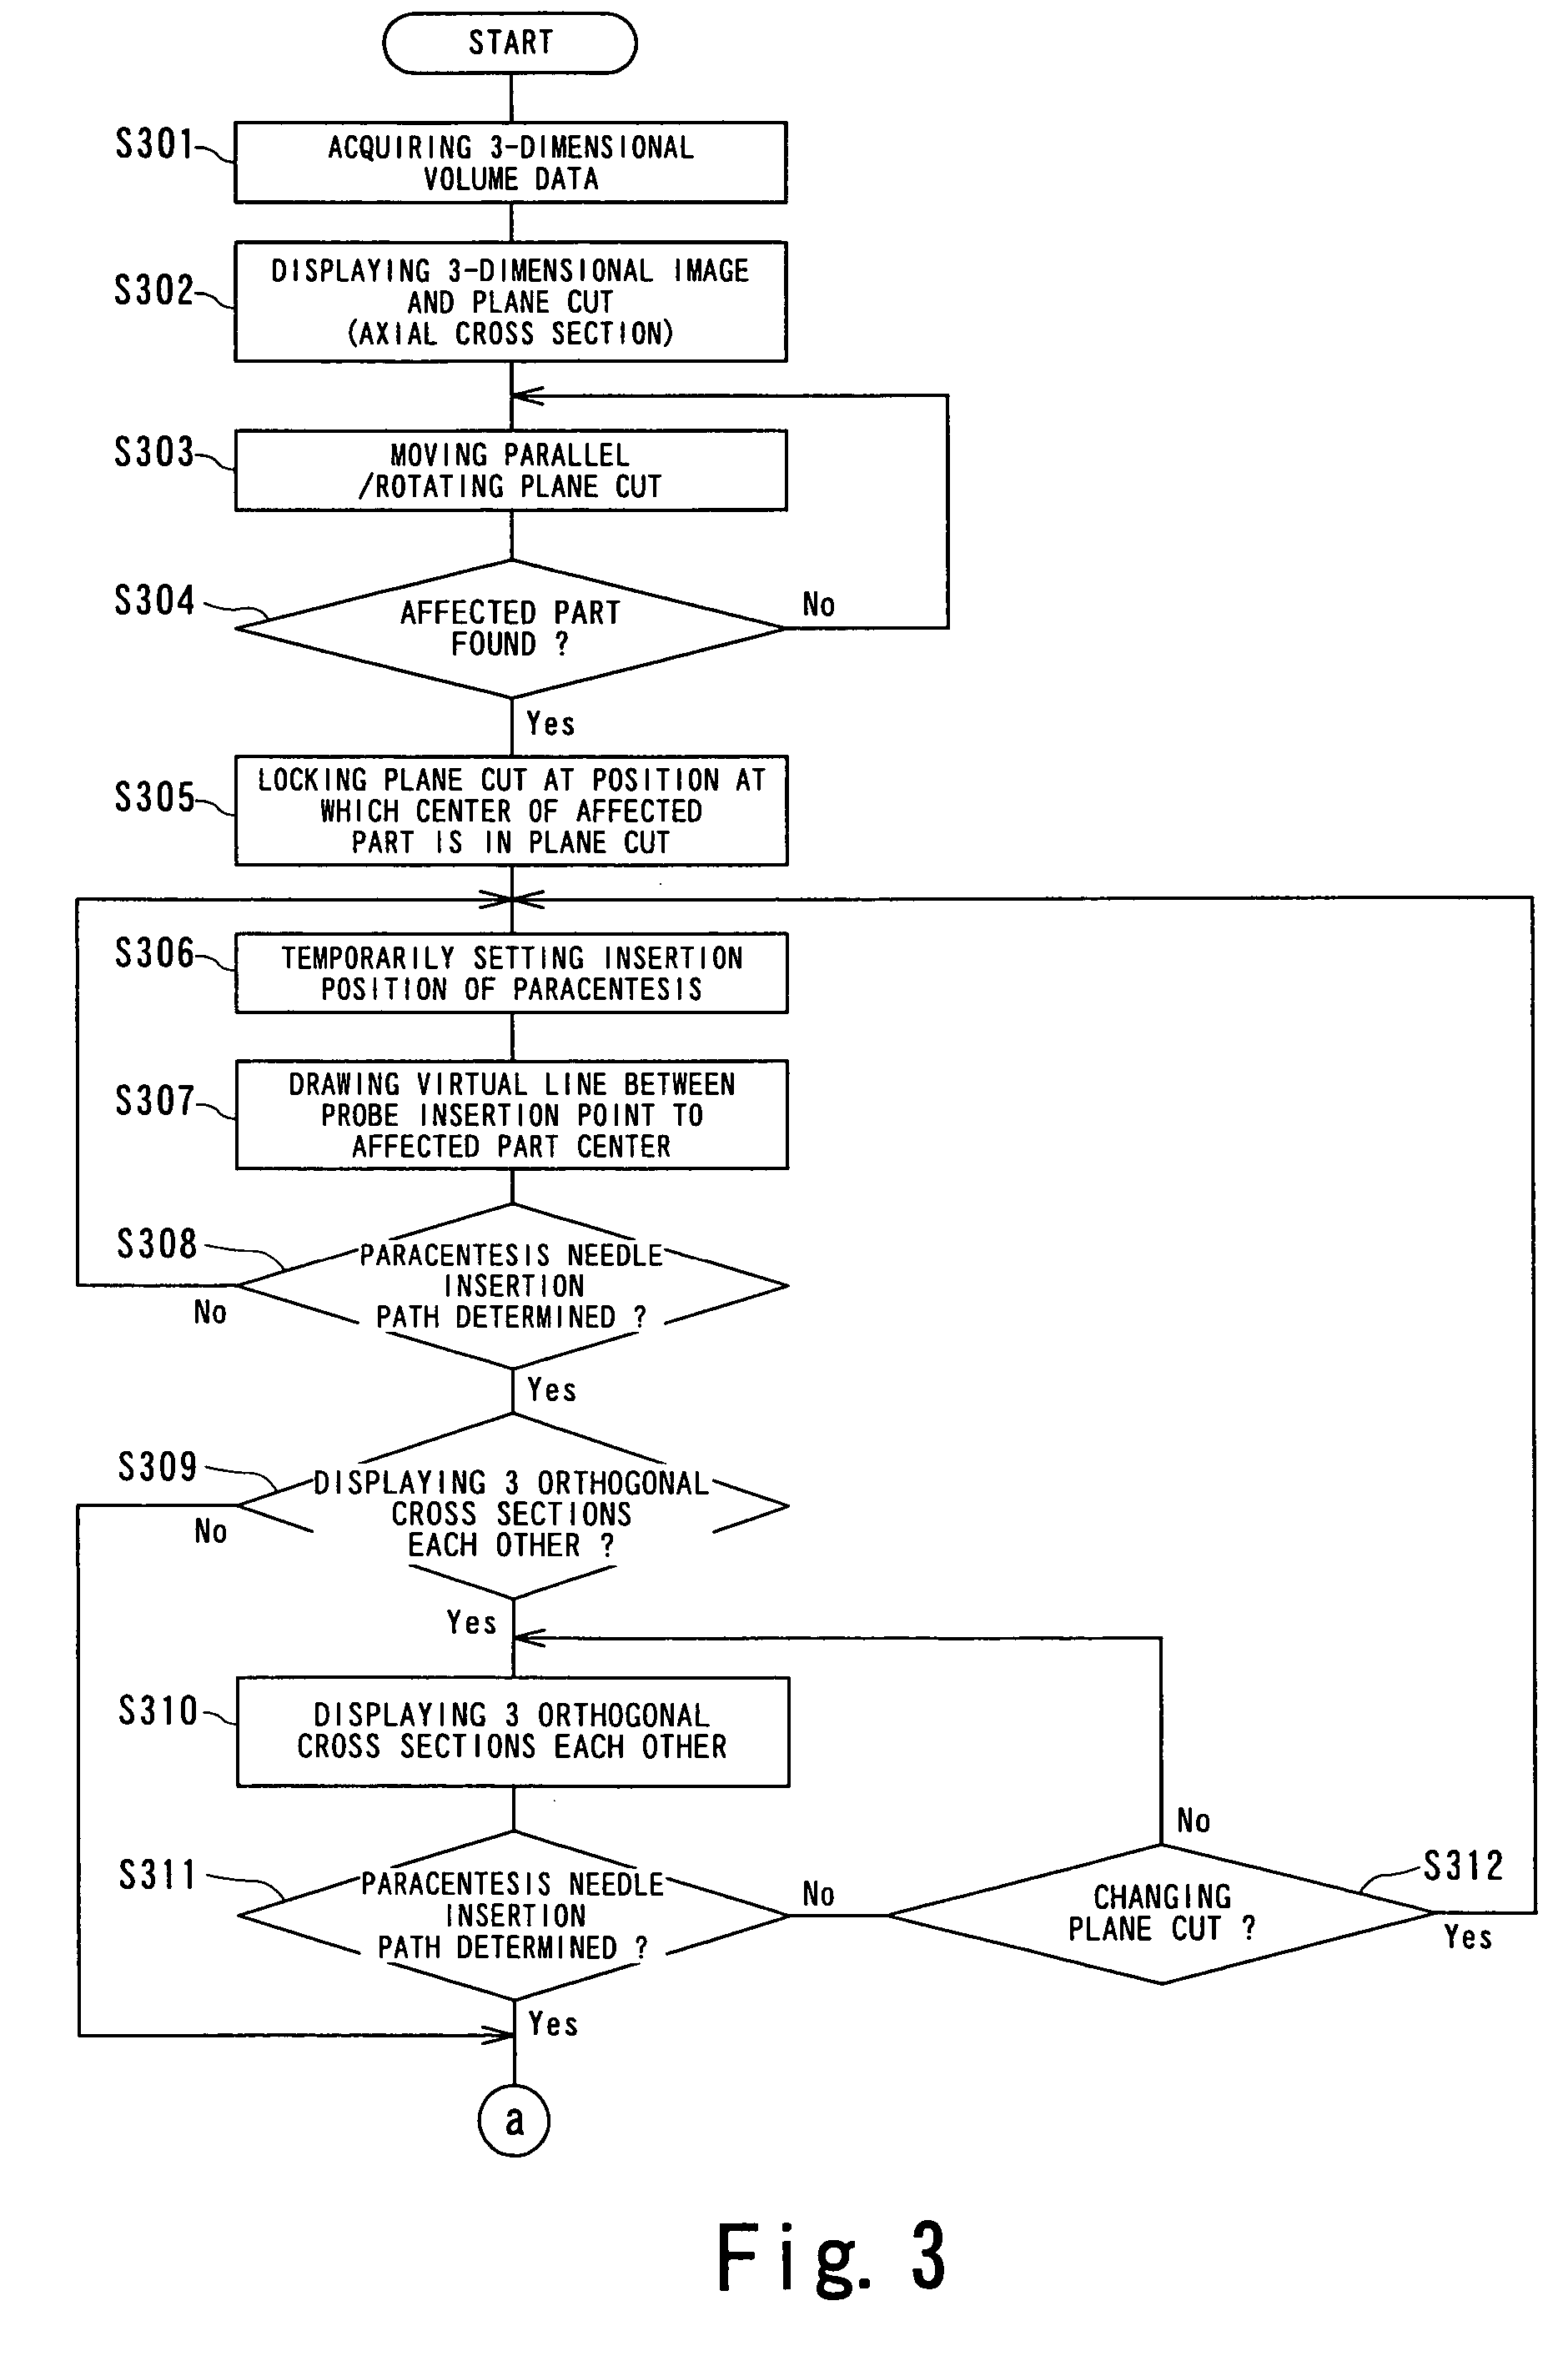 Image processing/displaying apparatus having free moving control unit and limited moving control unit and method of controlling the same